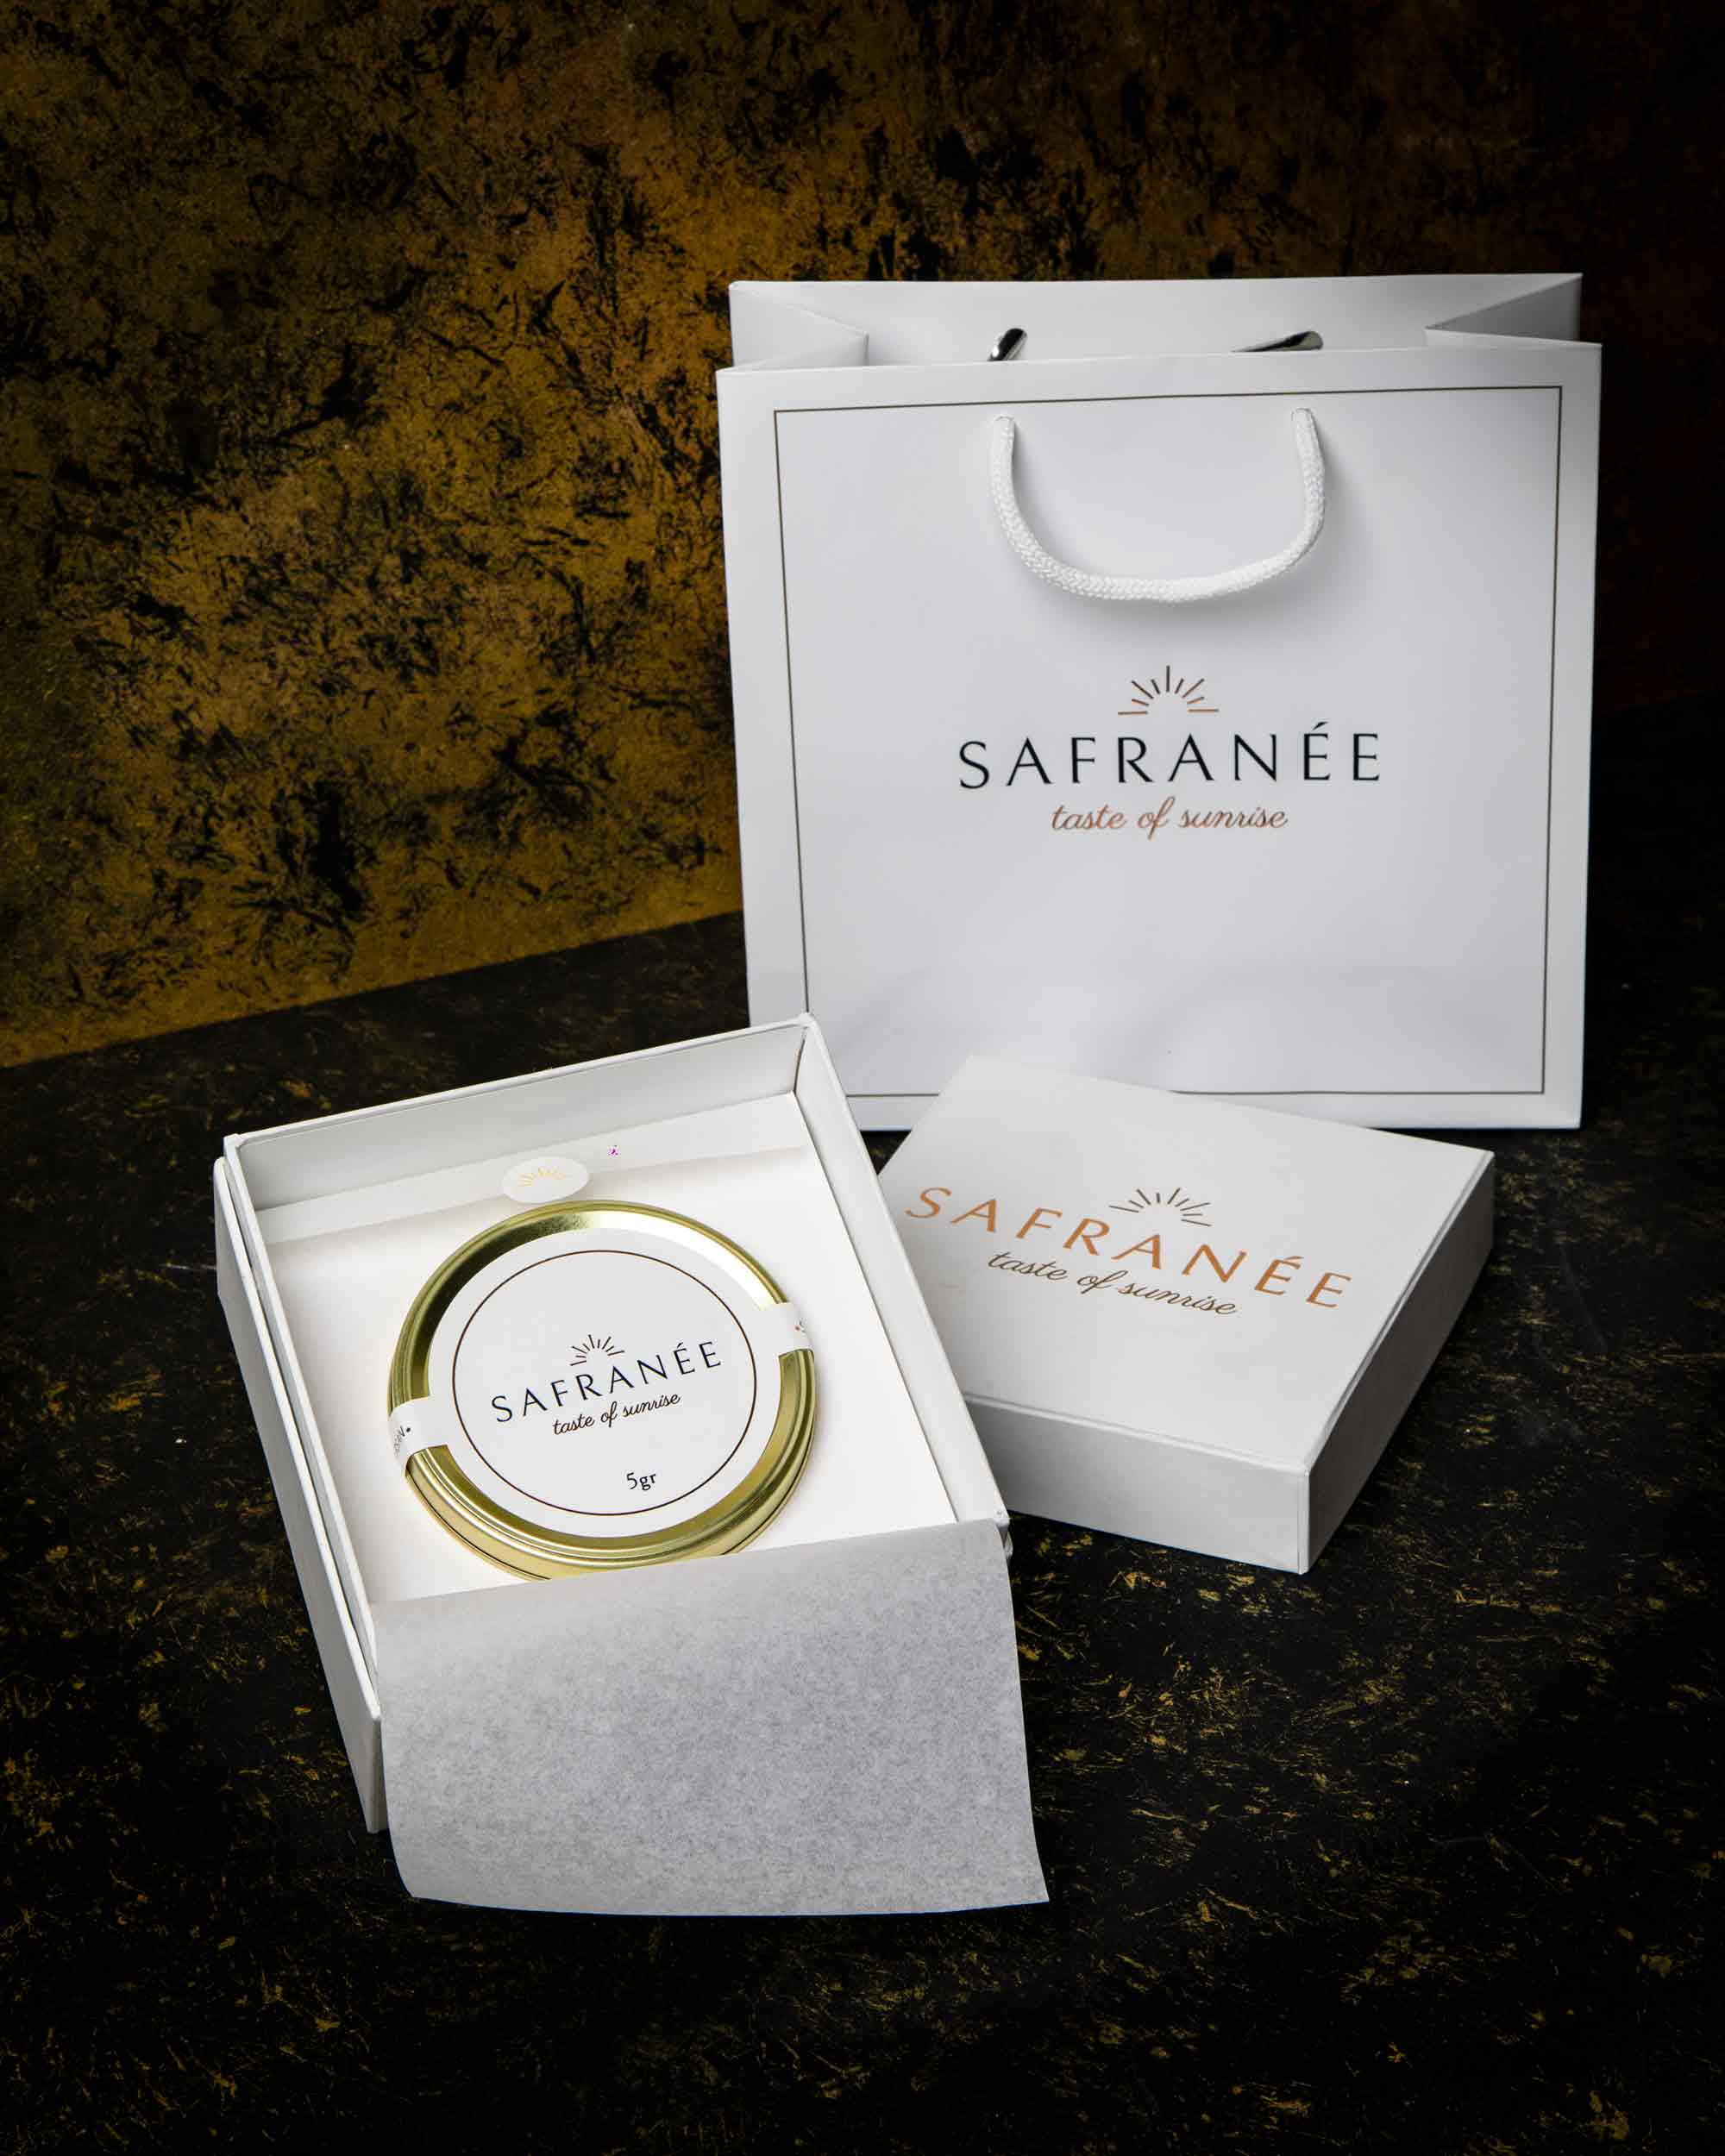 Elegant gift box containing 5g of the finest Persian saffron from Safranée